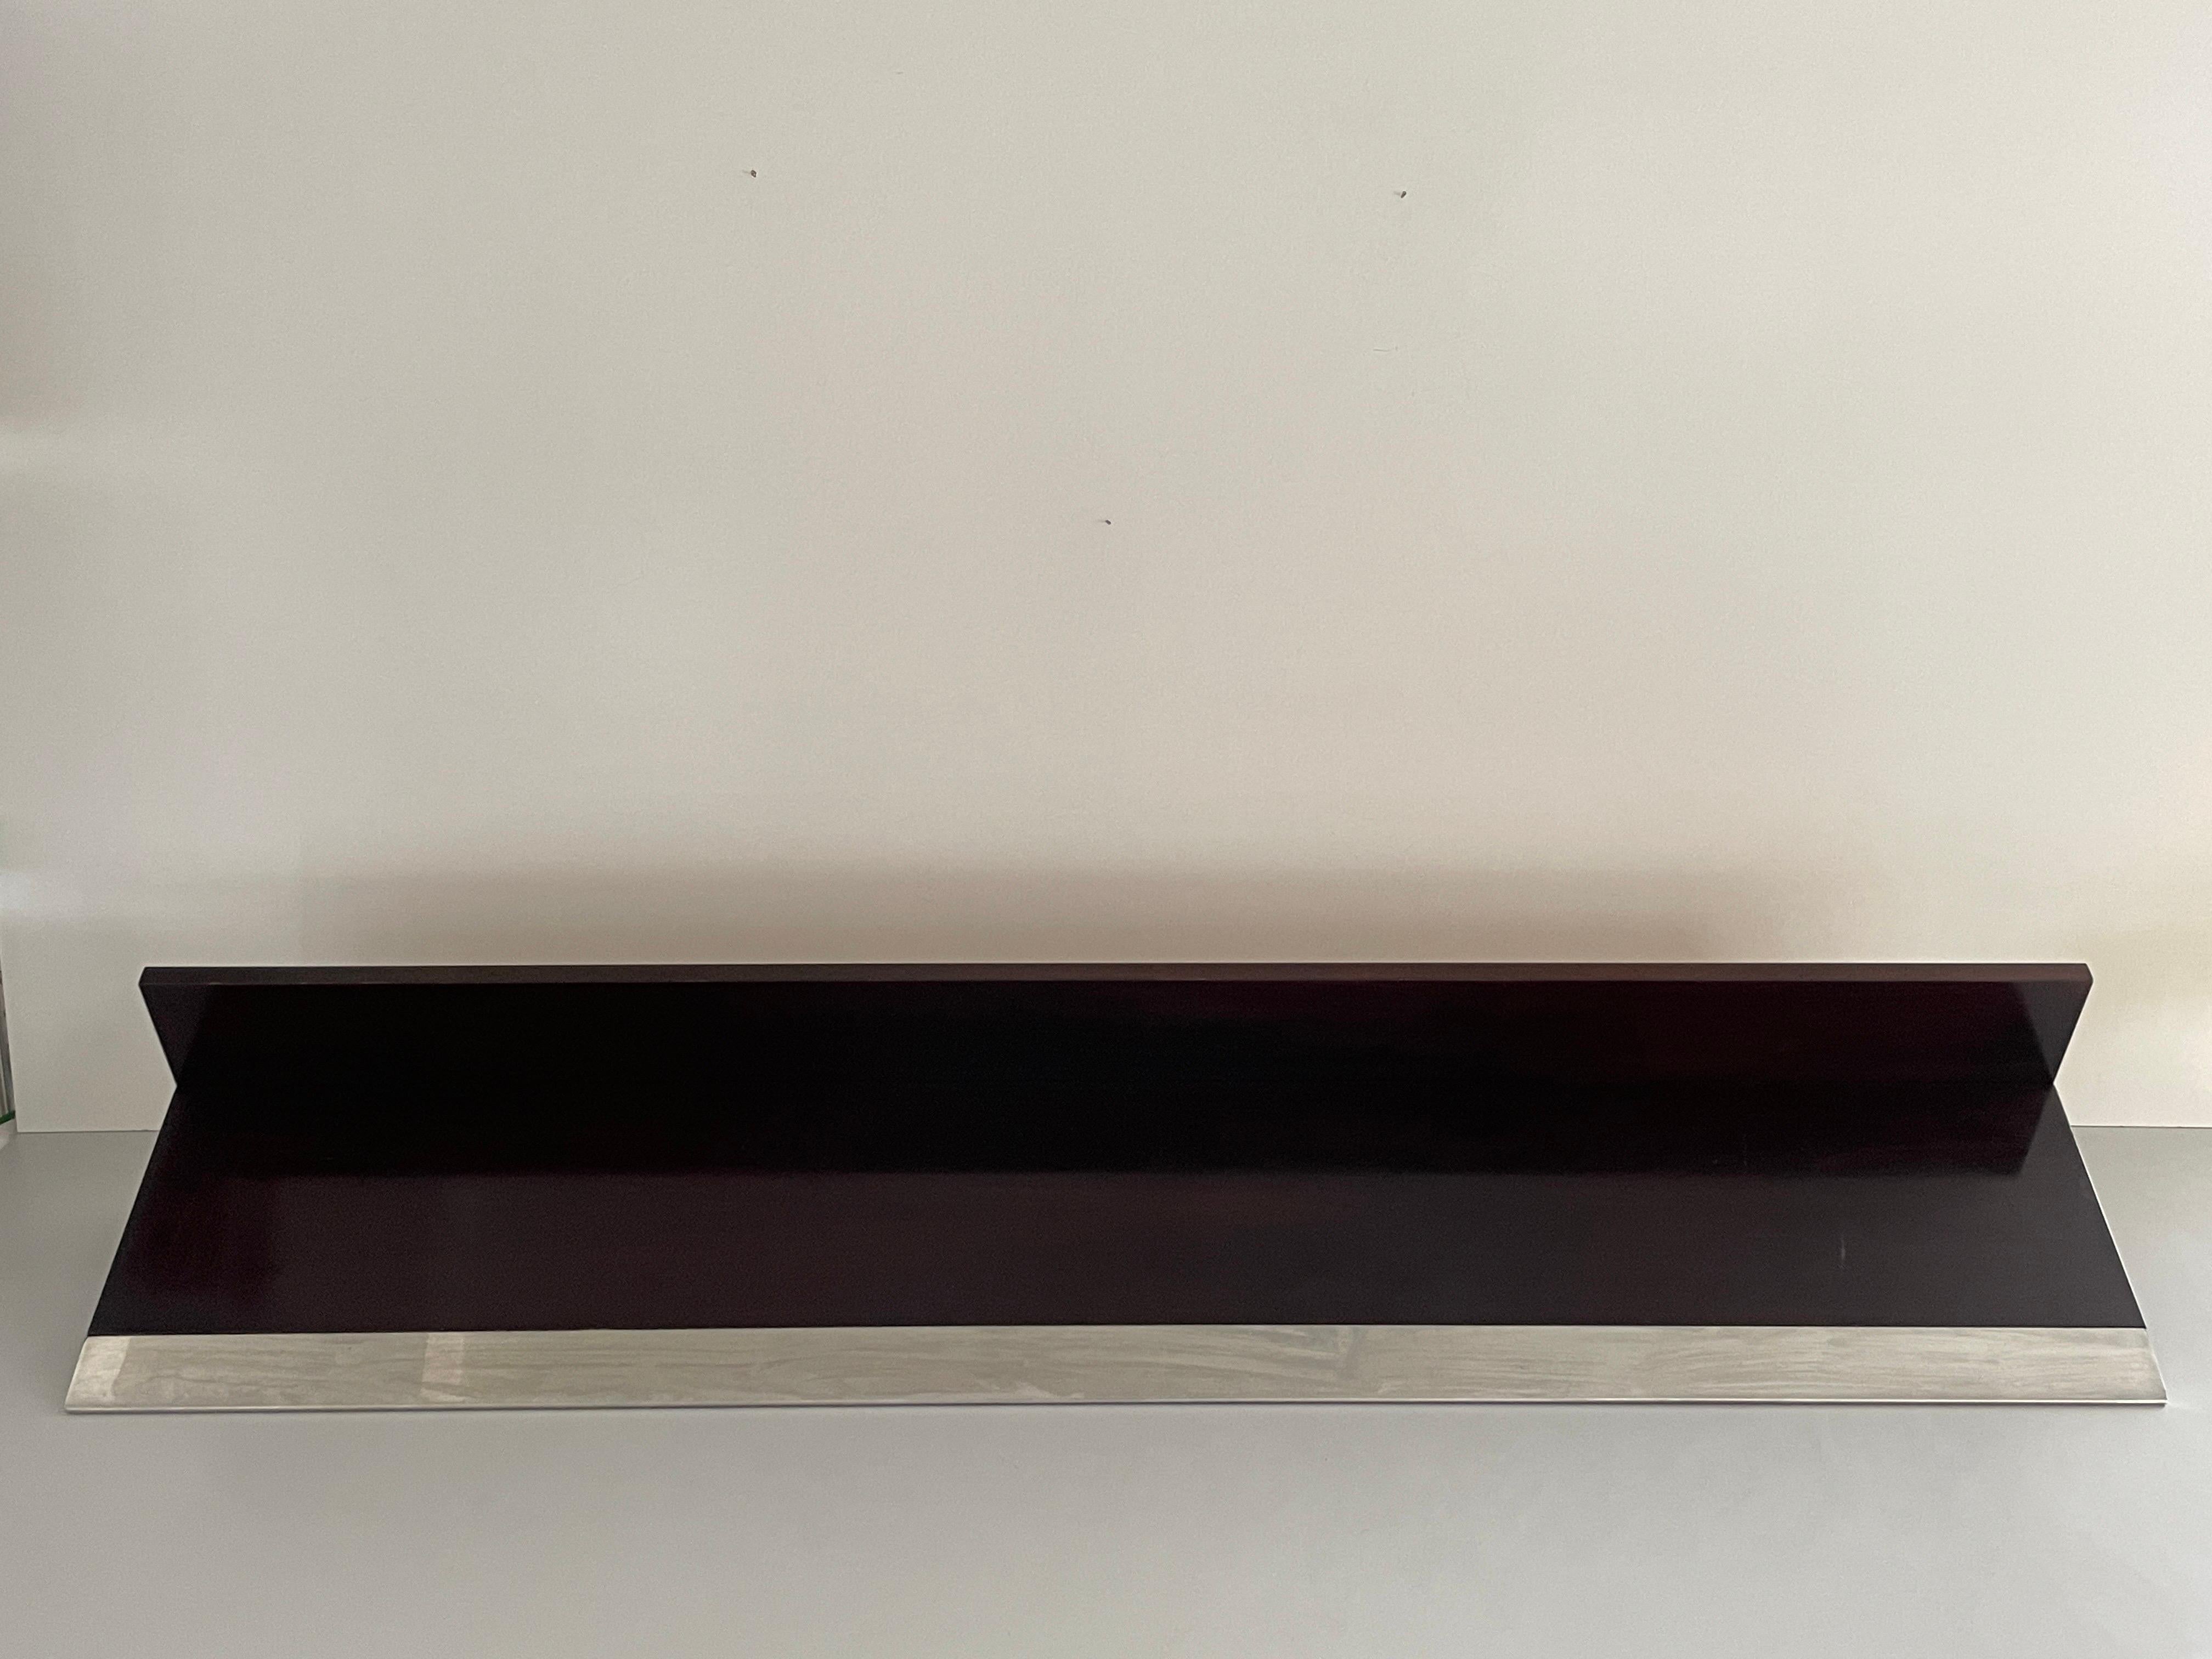 Mid-century Modern Rosewood Large Shelf Steel Cover by Saporiti, 1960s, Italy For Sale 2